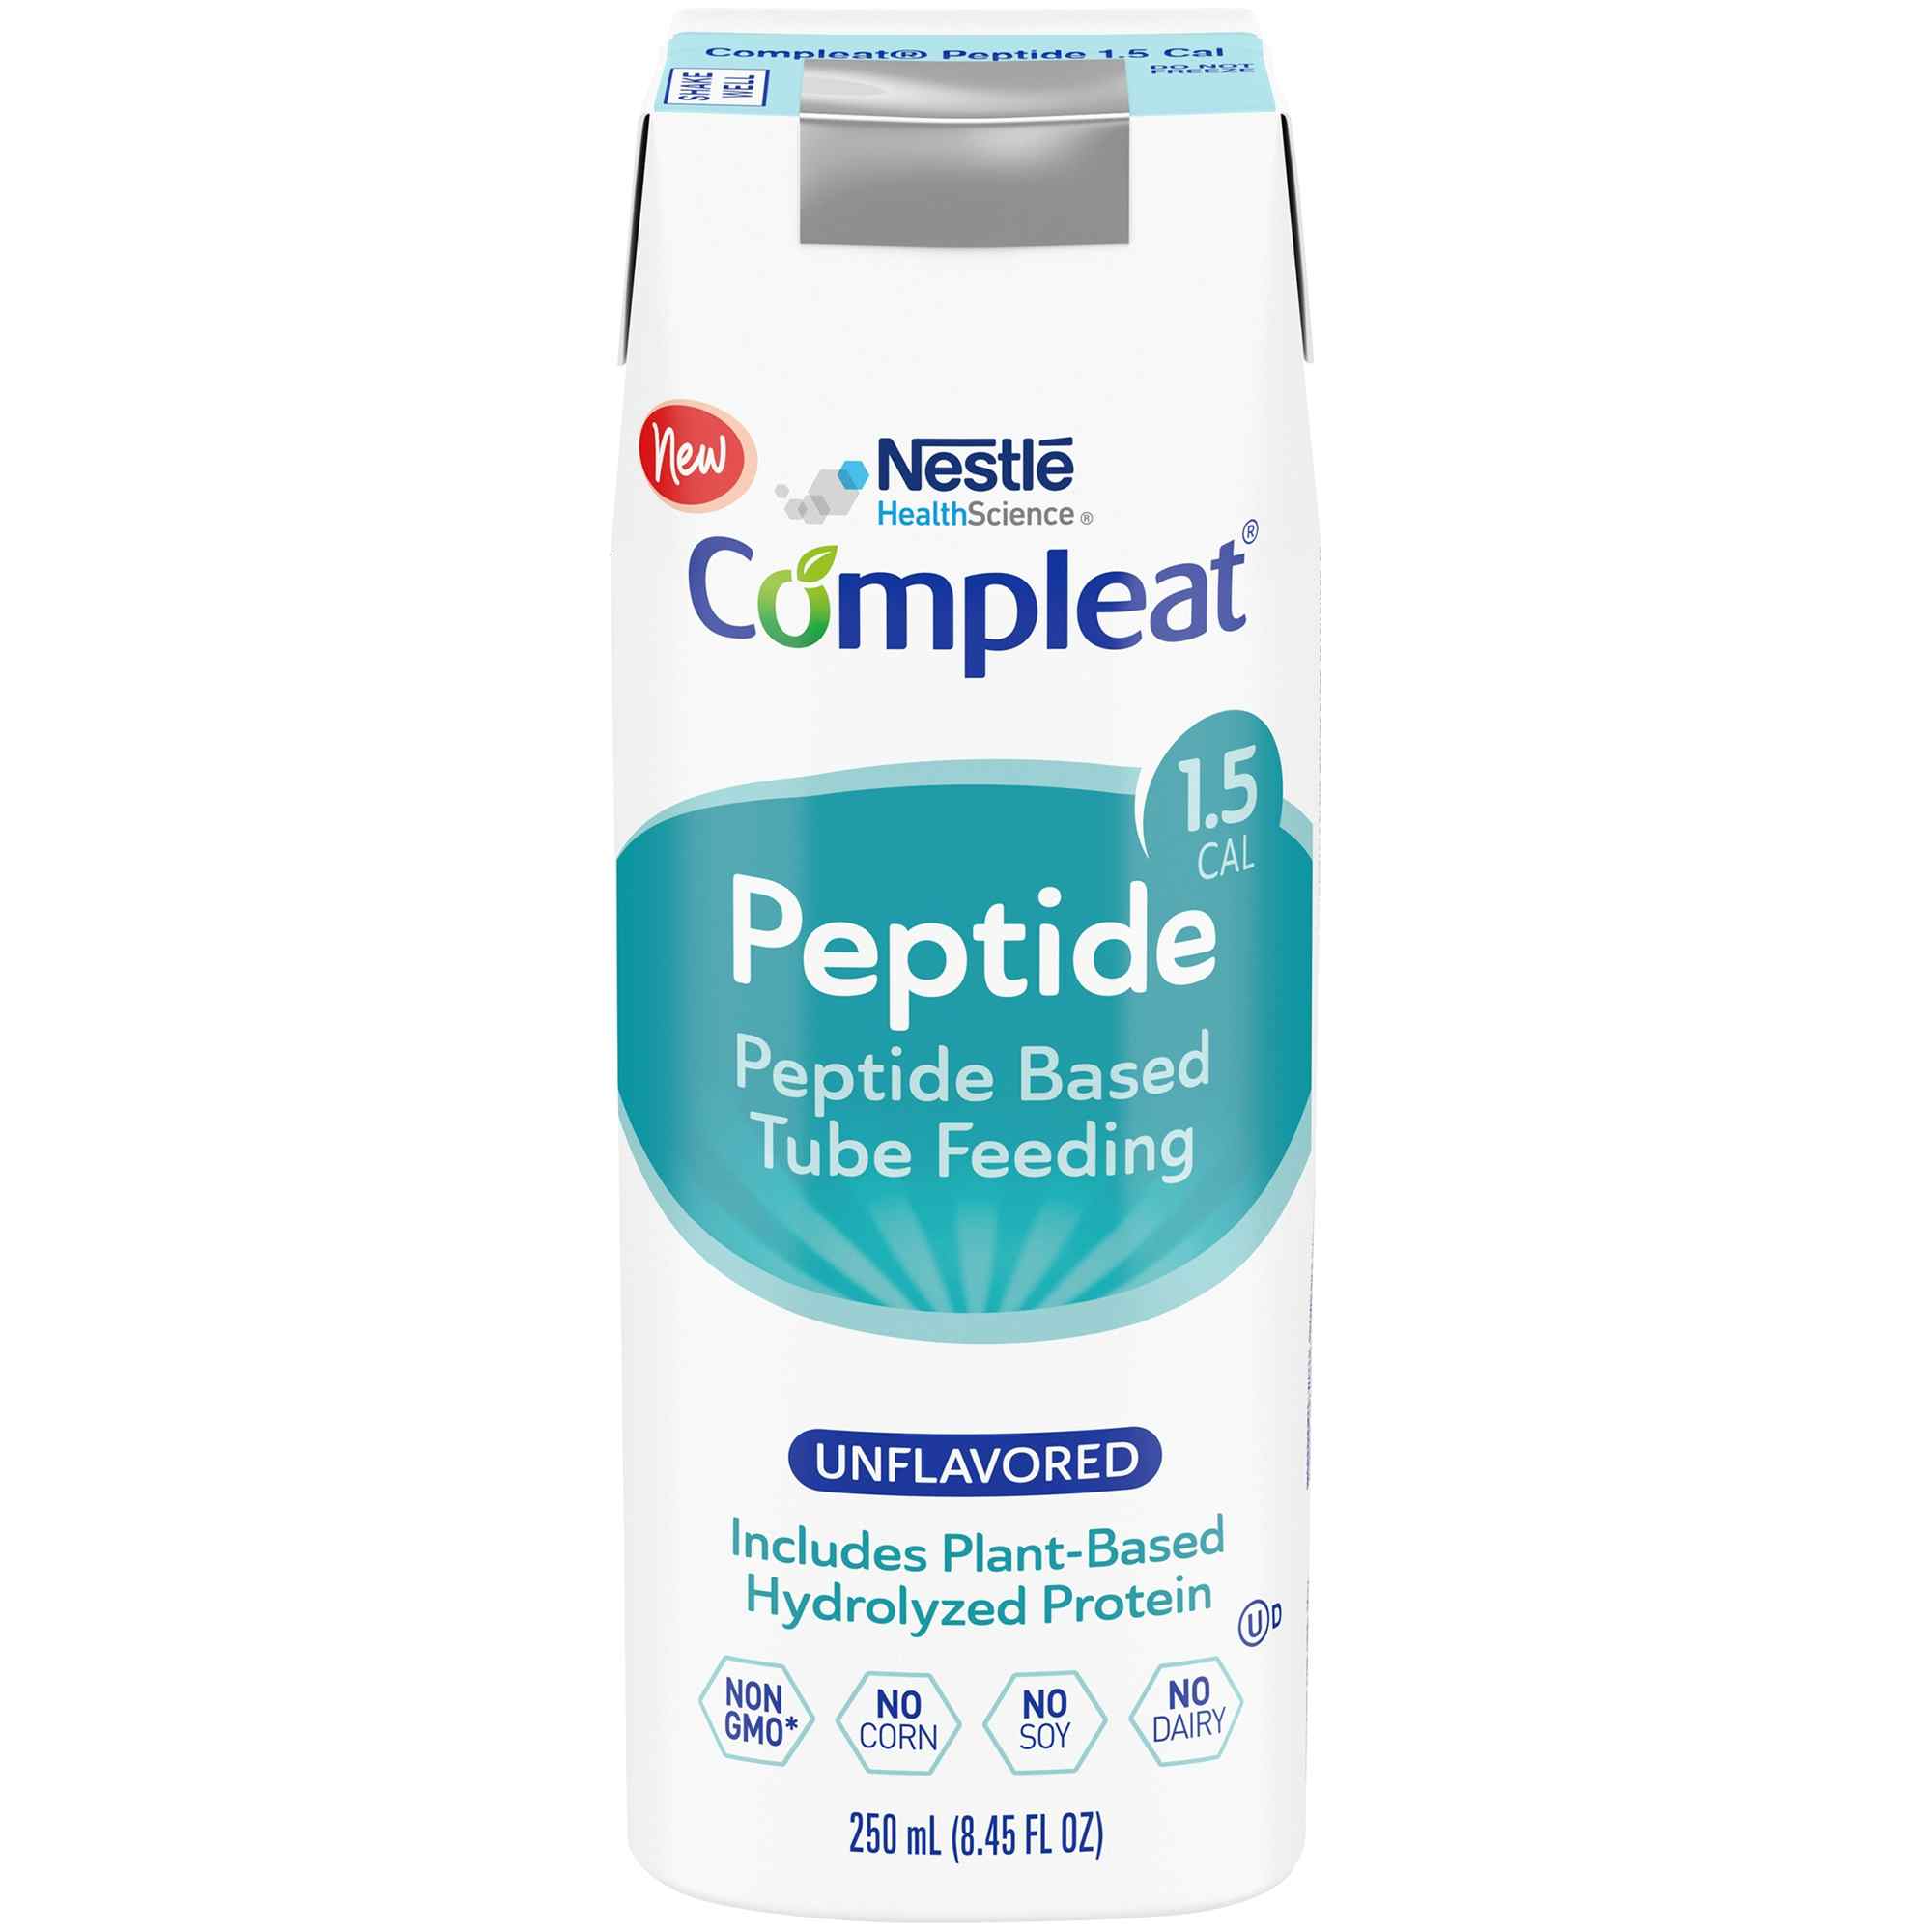 Compleat Peptide Ready to Use Oral Supplement/Tube Feeding Formula, Unflavored Carton, 4390076283, 1 Carton